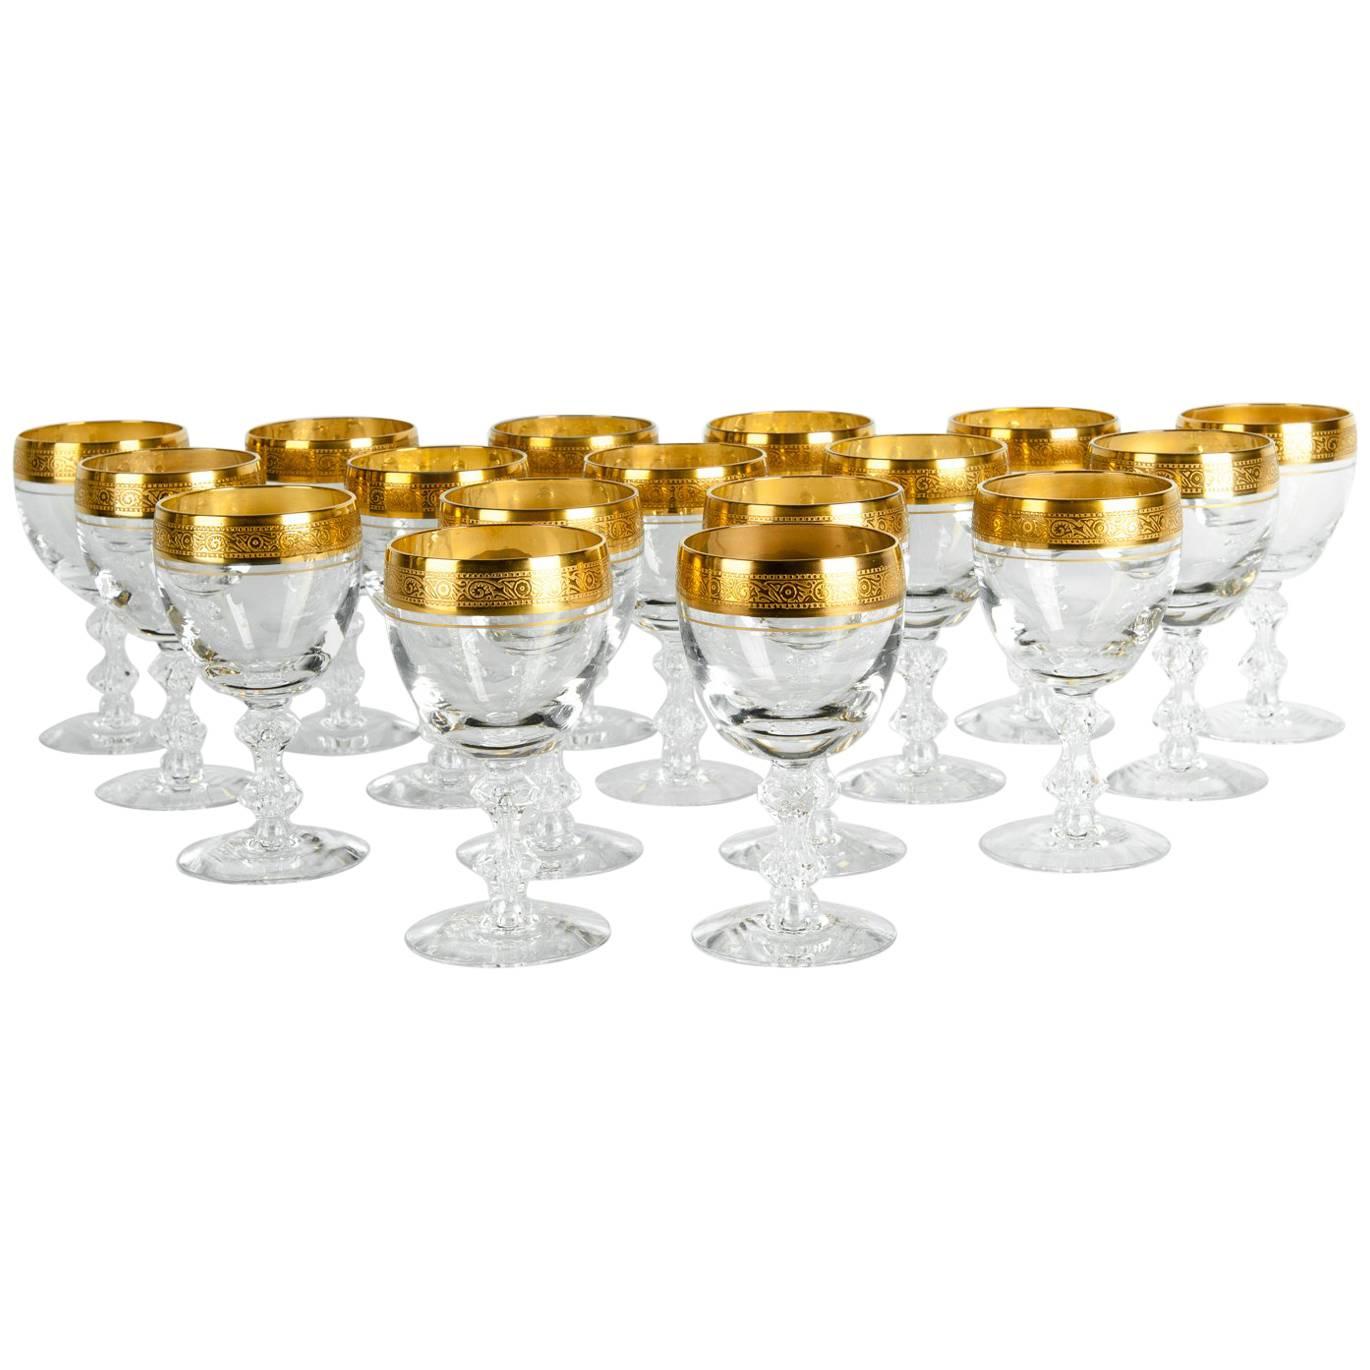 Vintage Cut Crystal with Gold Design Top Wine/Water Glassware Set